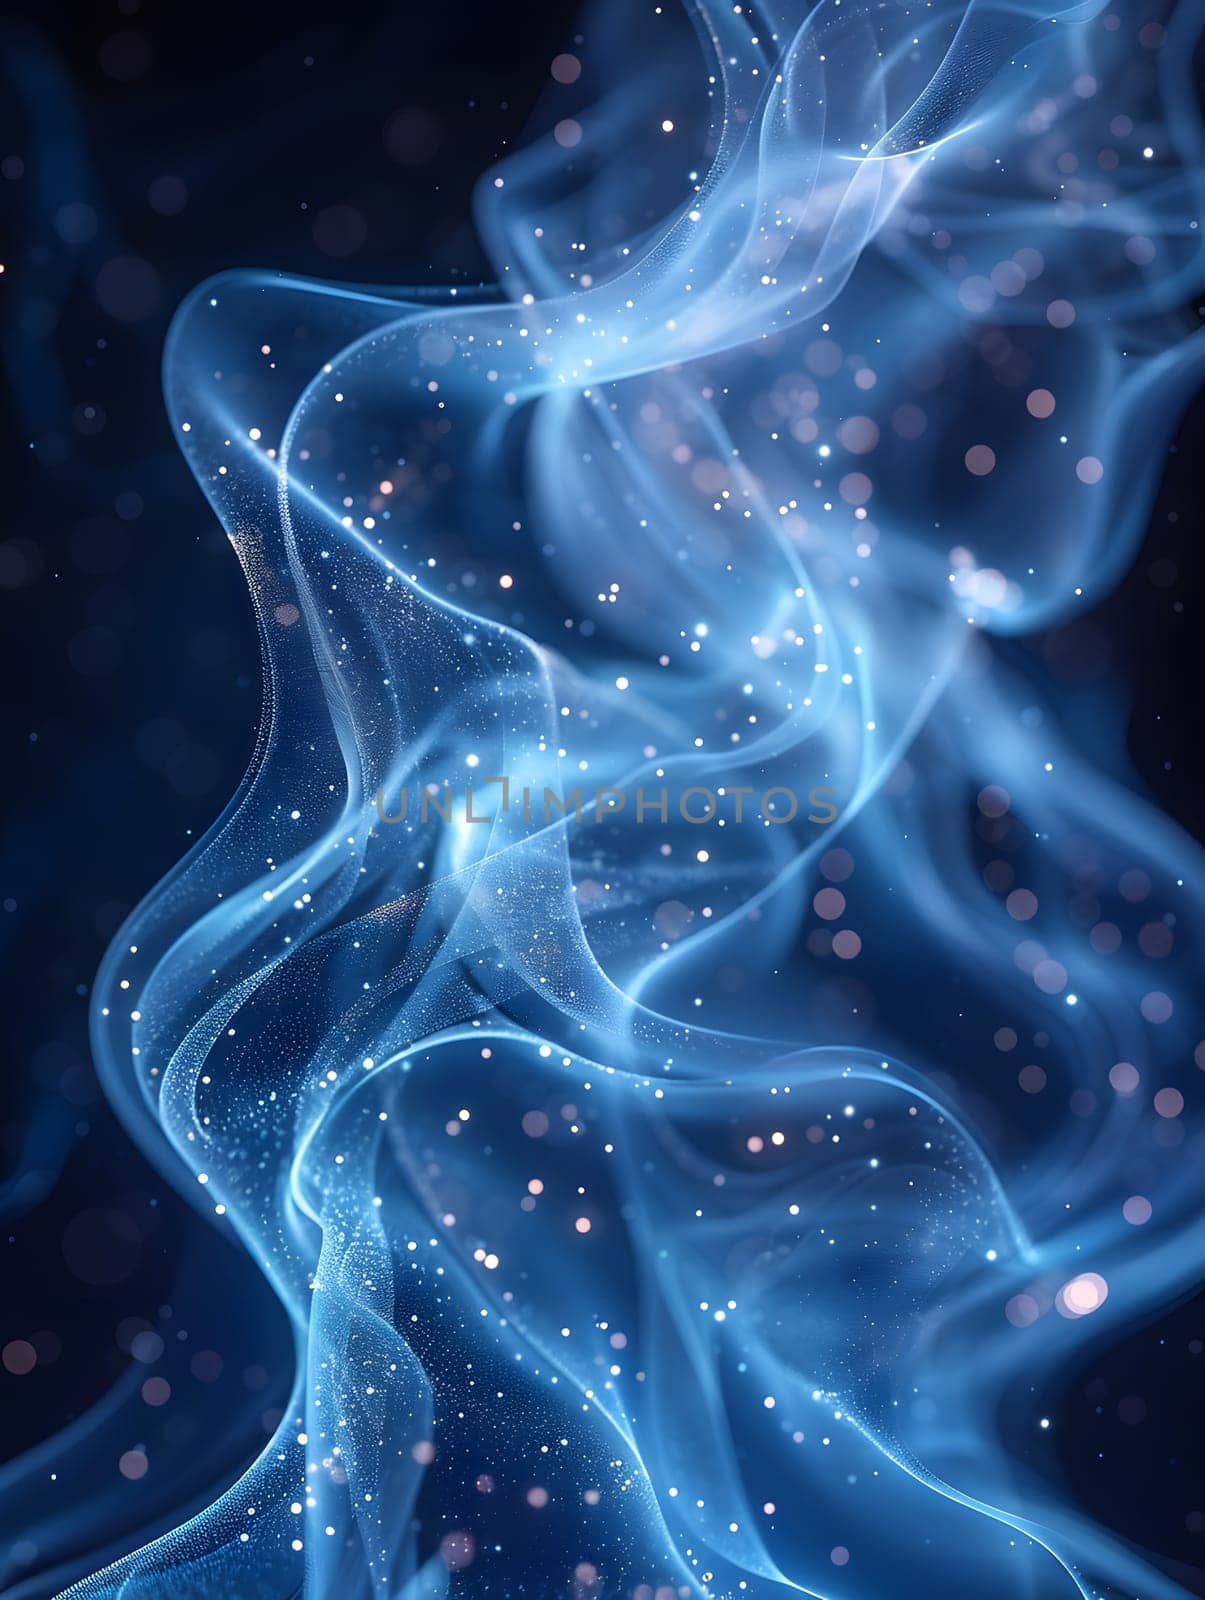 Electric blue smoke art in darkness, gas pattern on black background by Nadtochiy